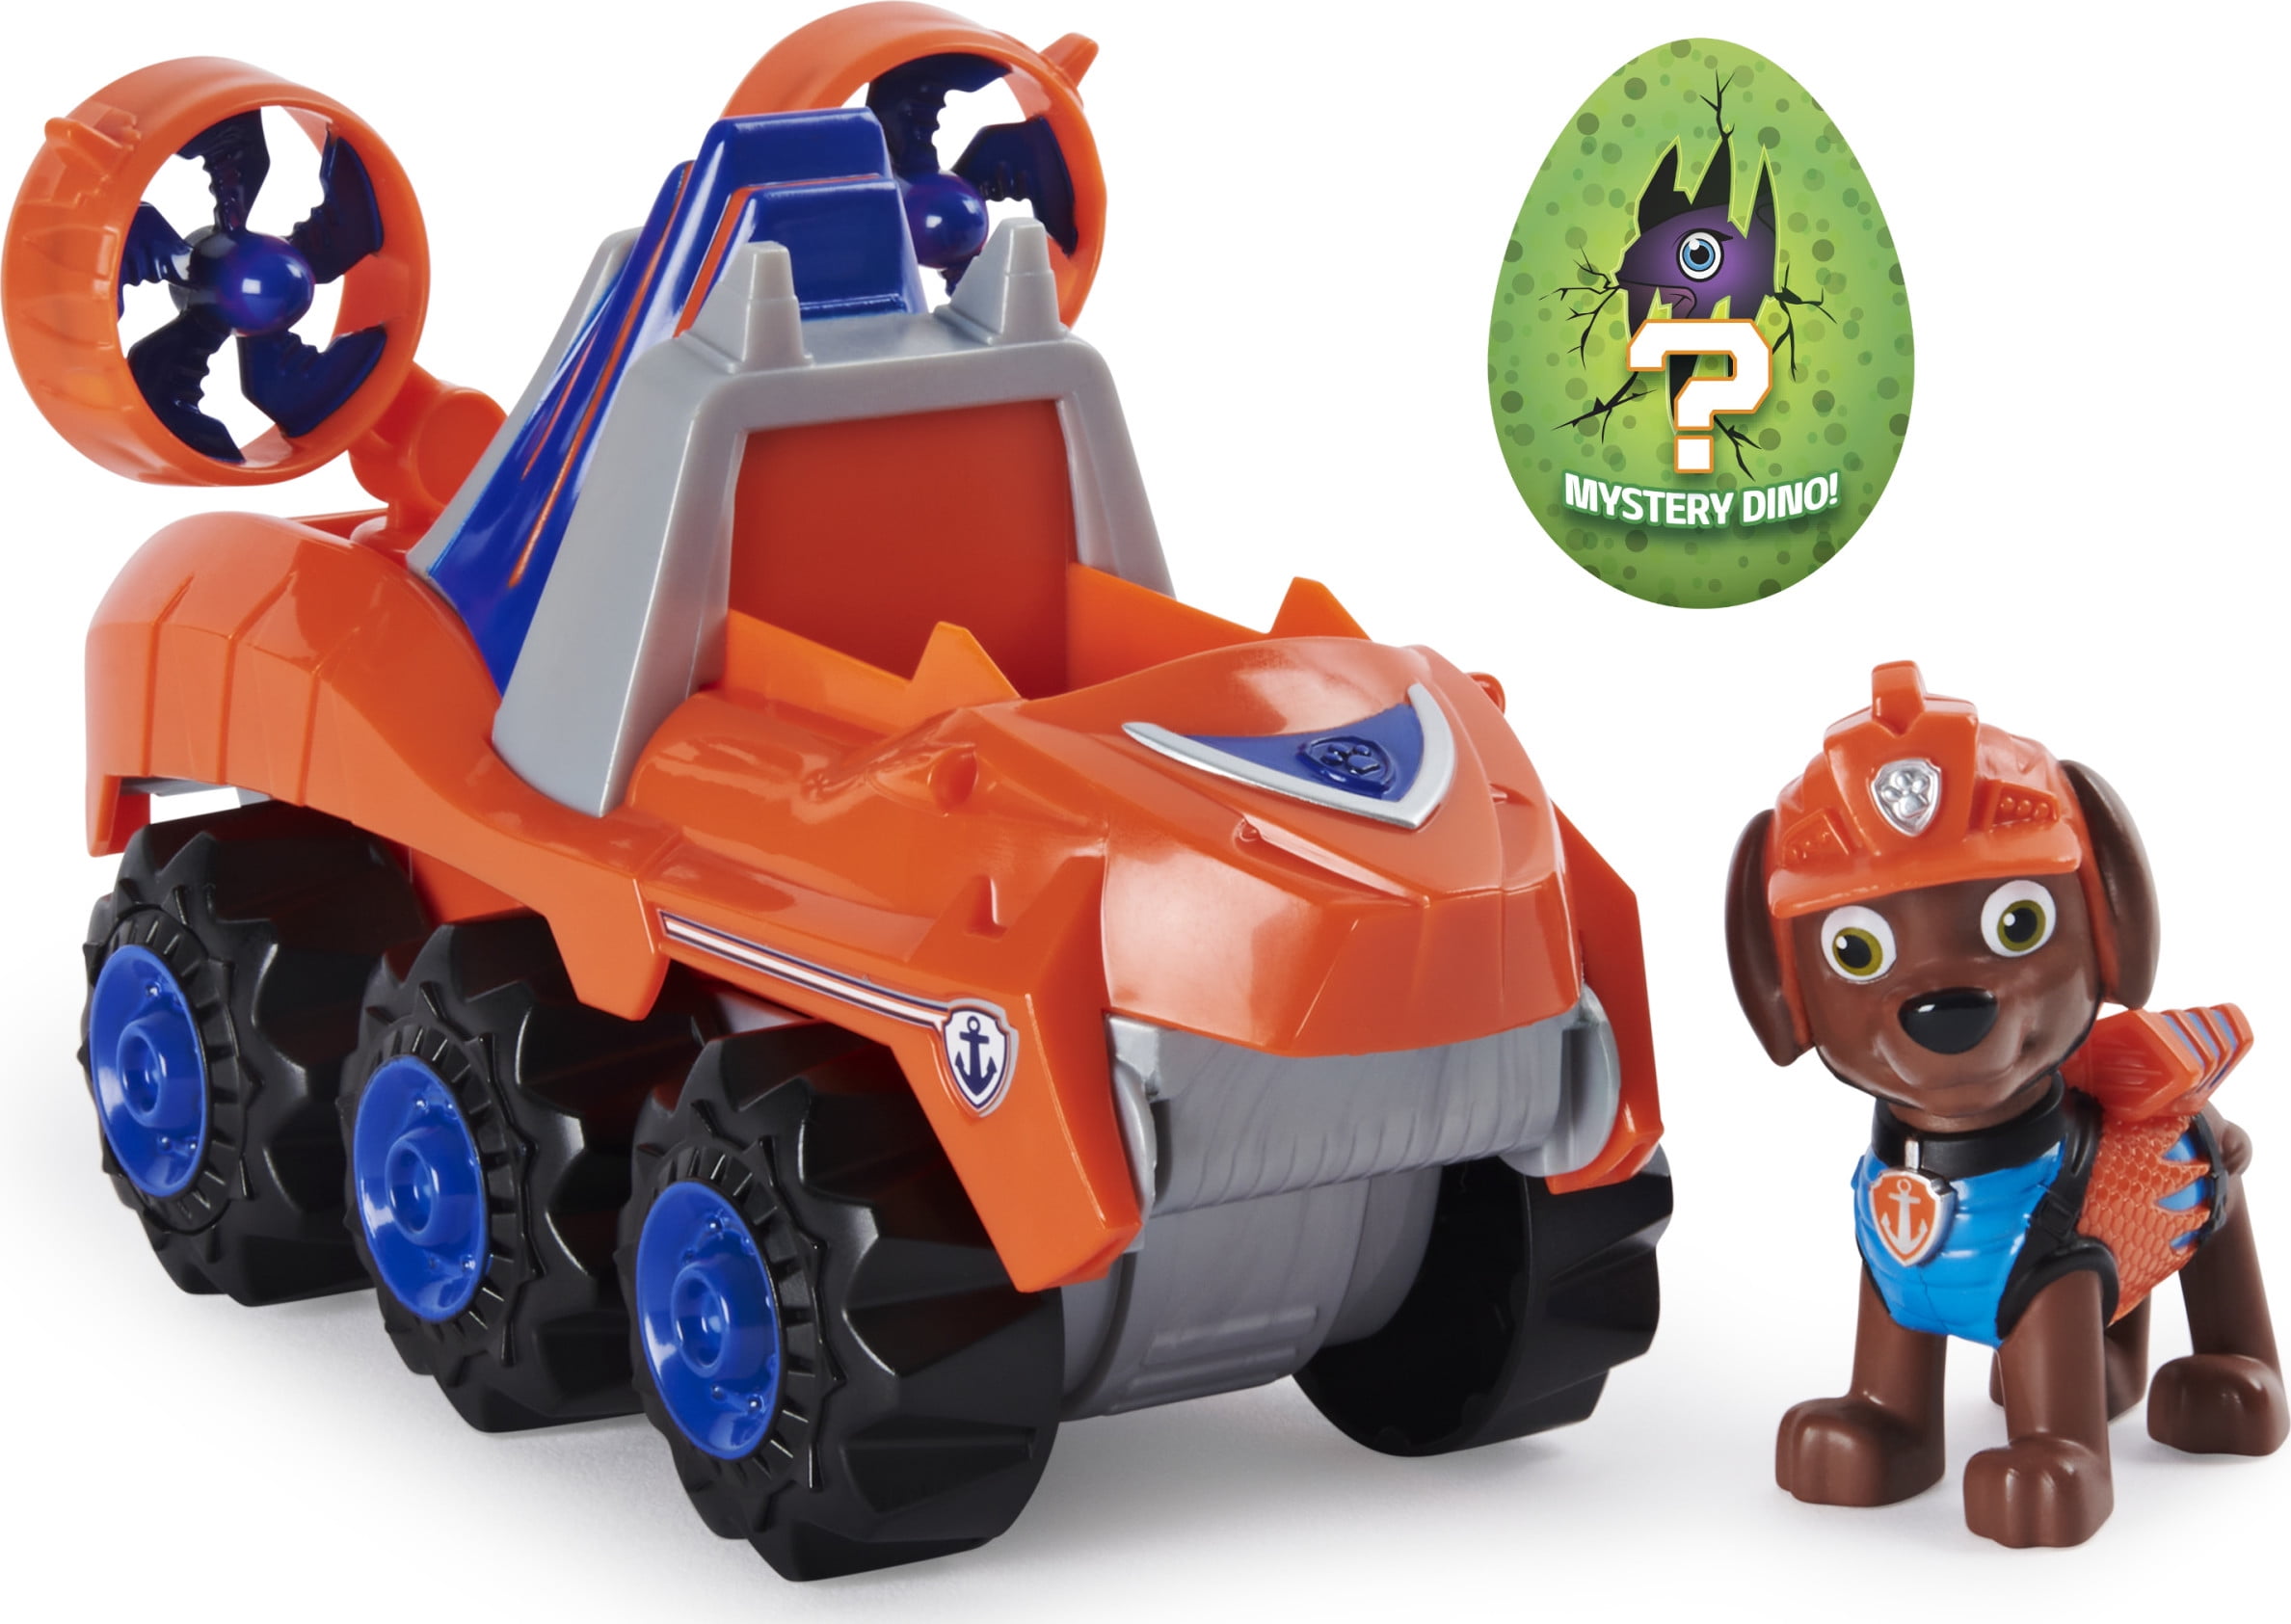 NEW Paw Patrol DINO RESCUE REX Deluxe VEHICLE PUPPY FIGURE Mystery Dinosaur Egg 